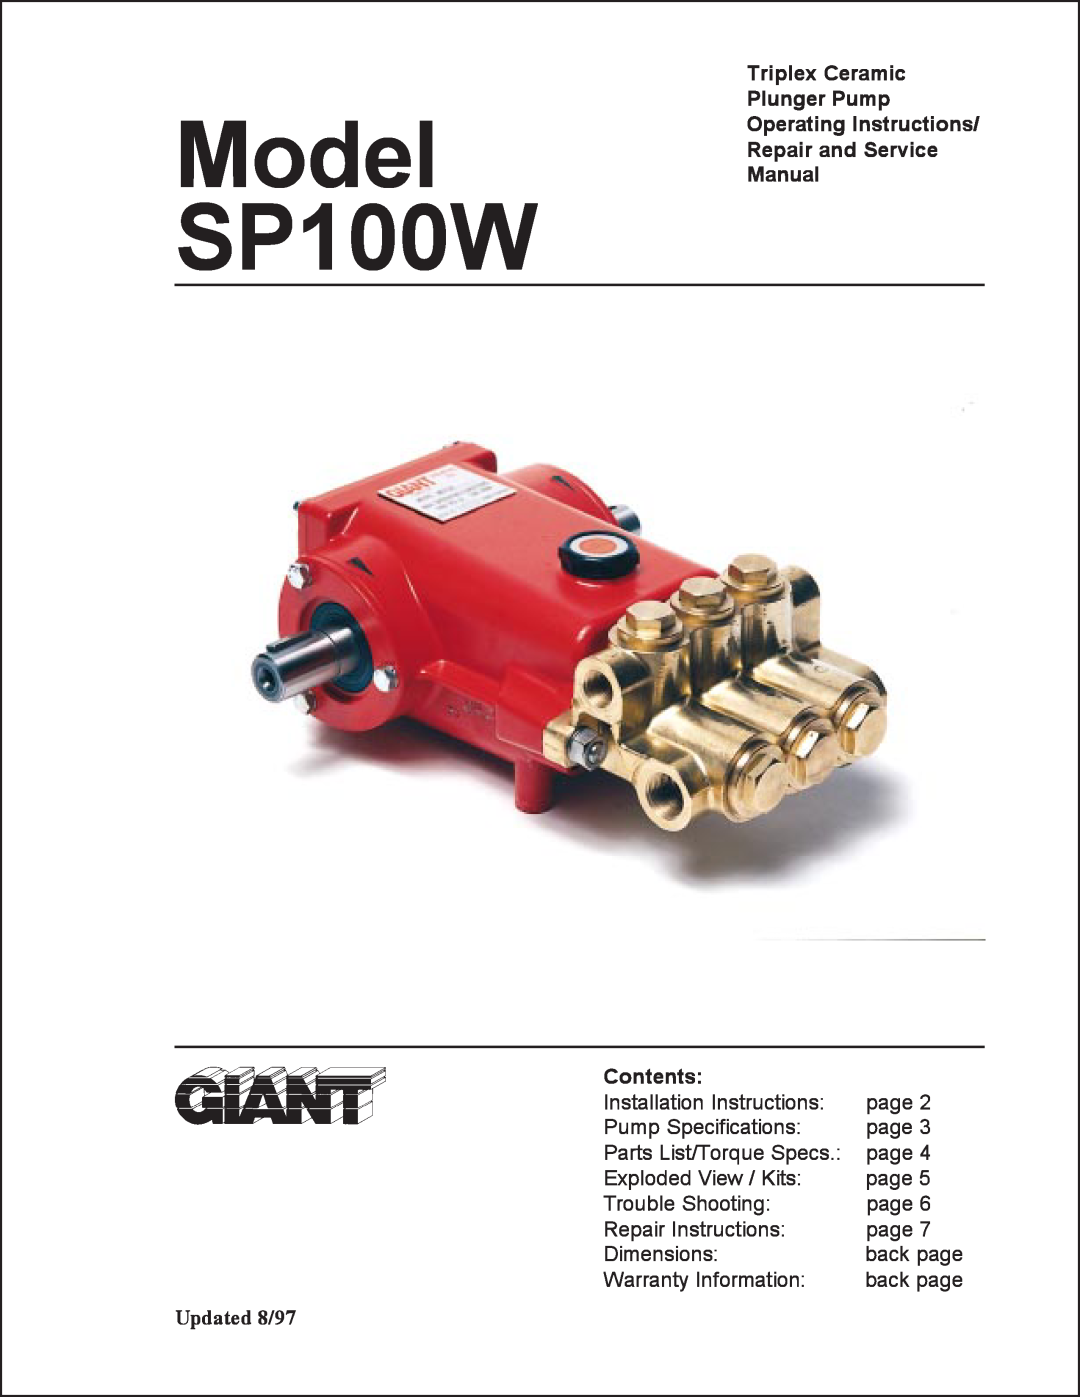 Giant SP100W service manual Triplex Ceramic Plunger Pump Operating Instructions, Repair and Service Manual, Contents 